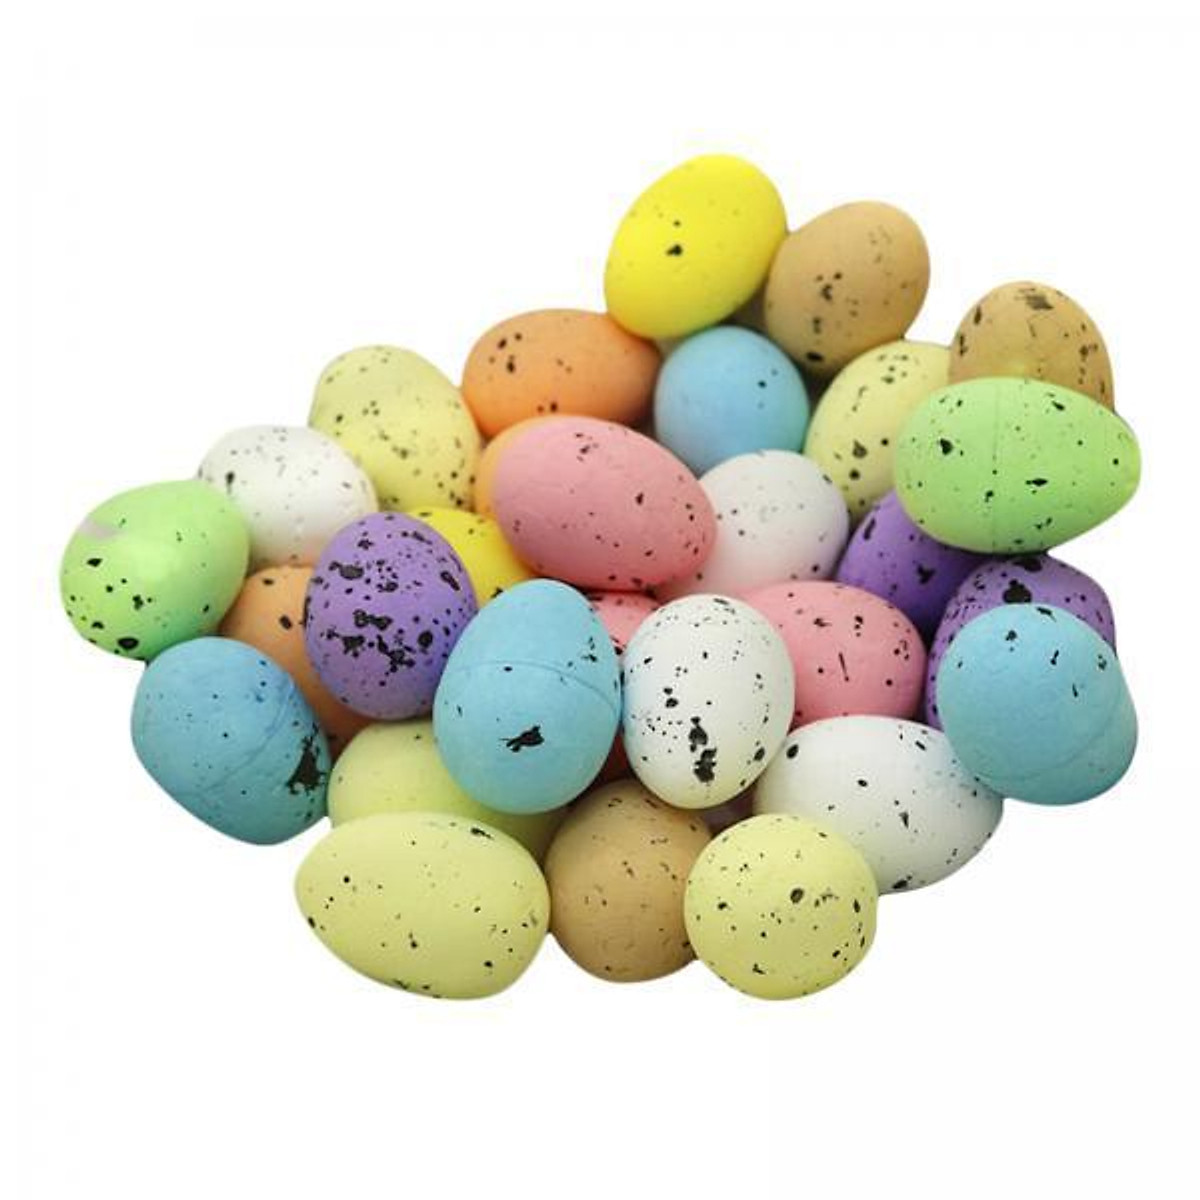 Mua 3X 30Pieces Speckled Easter Eggs Simulation Colorful Easter ...